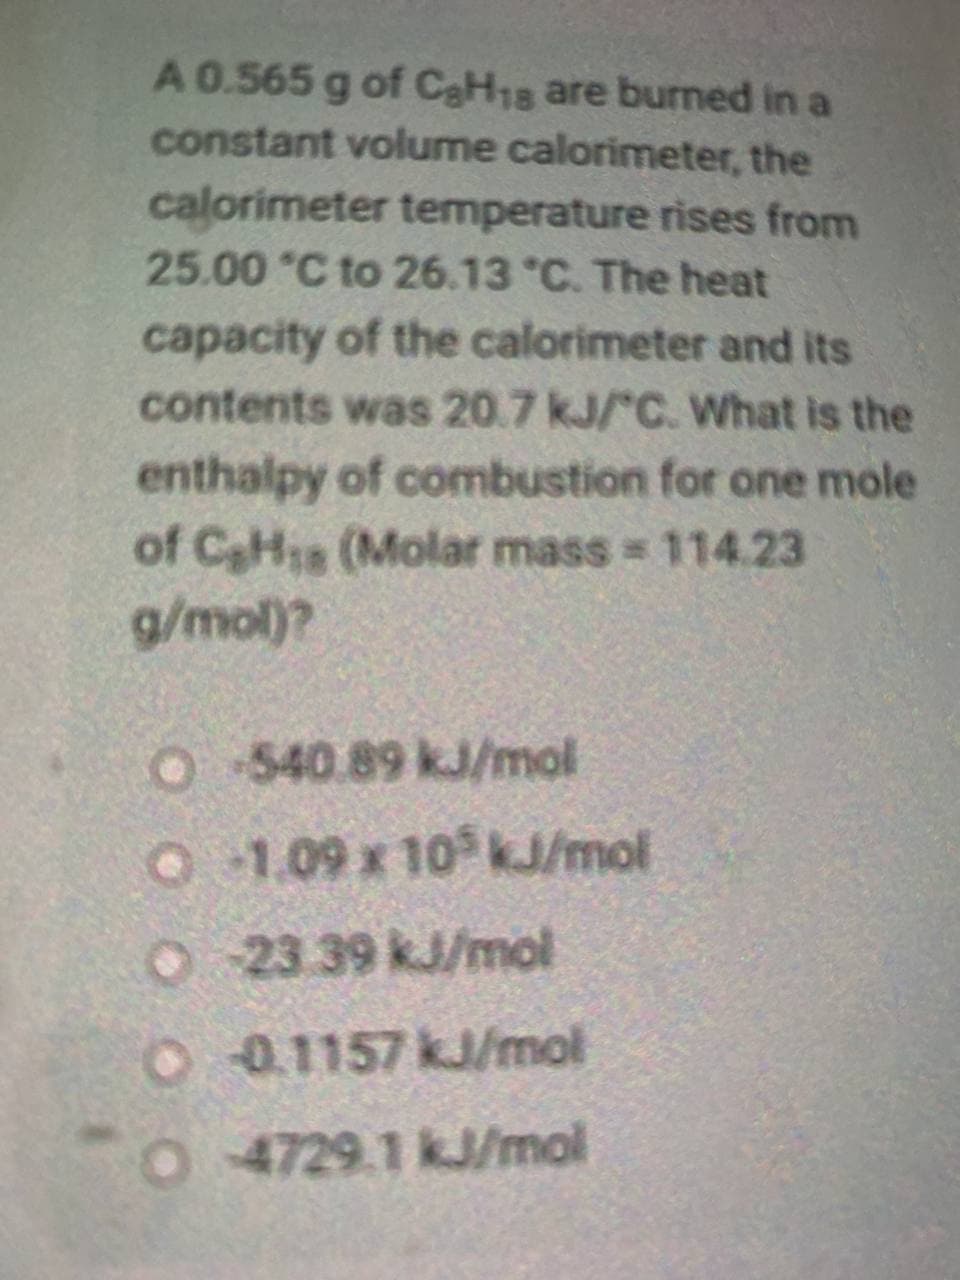 A 0.565 g of CaH1s are burned in a
constant volume calorimeter, the
calorimeter temperature rises from
25.00 °C to 26.13 °C. The heat
capacity of the calorimeter and its
contents was 20.7 kJ/ C. What is the
enthalpy of combustion for one mole
of CaHs (Molar mass 114.23
g/mol)?
O540.89 kJ/mol
O 1.09 x 10 kJ/mol
O 23 39 kJ/mol
O01157 kJ/mol
4729.1 kJ/mol
